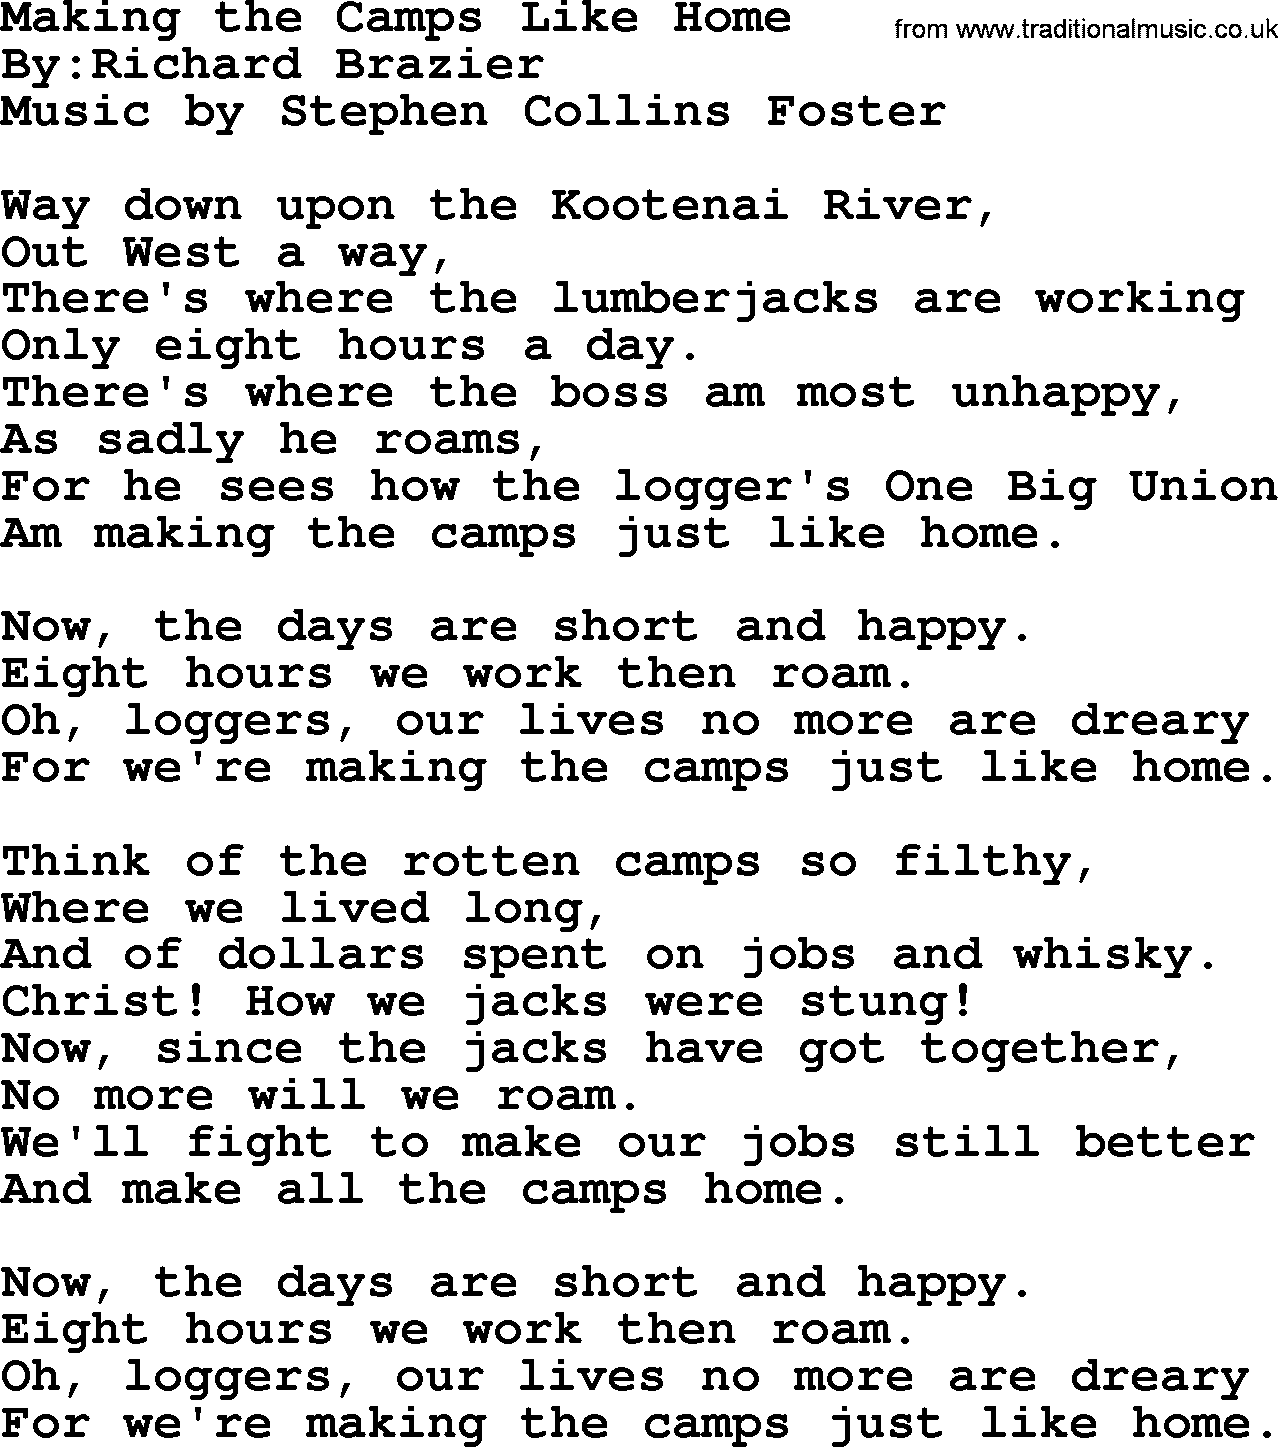 Political, Solidarity, Workers or Union song: Making The Camps Like Home, lyrics